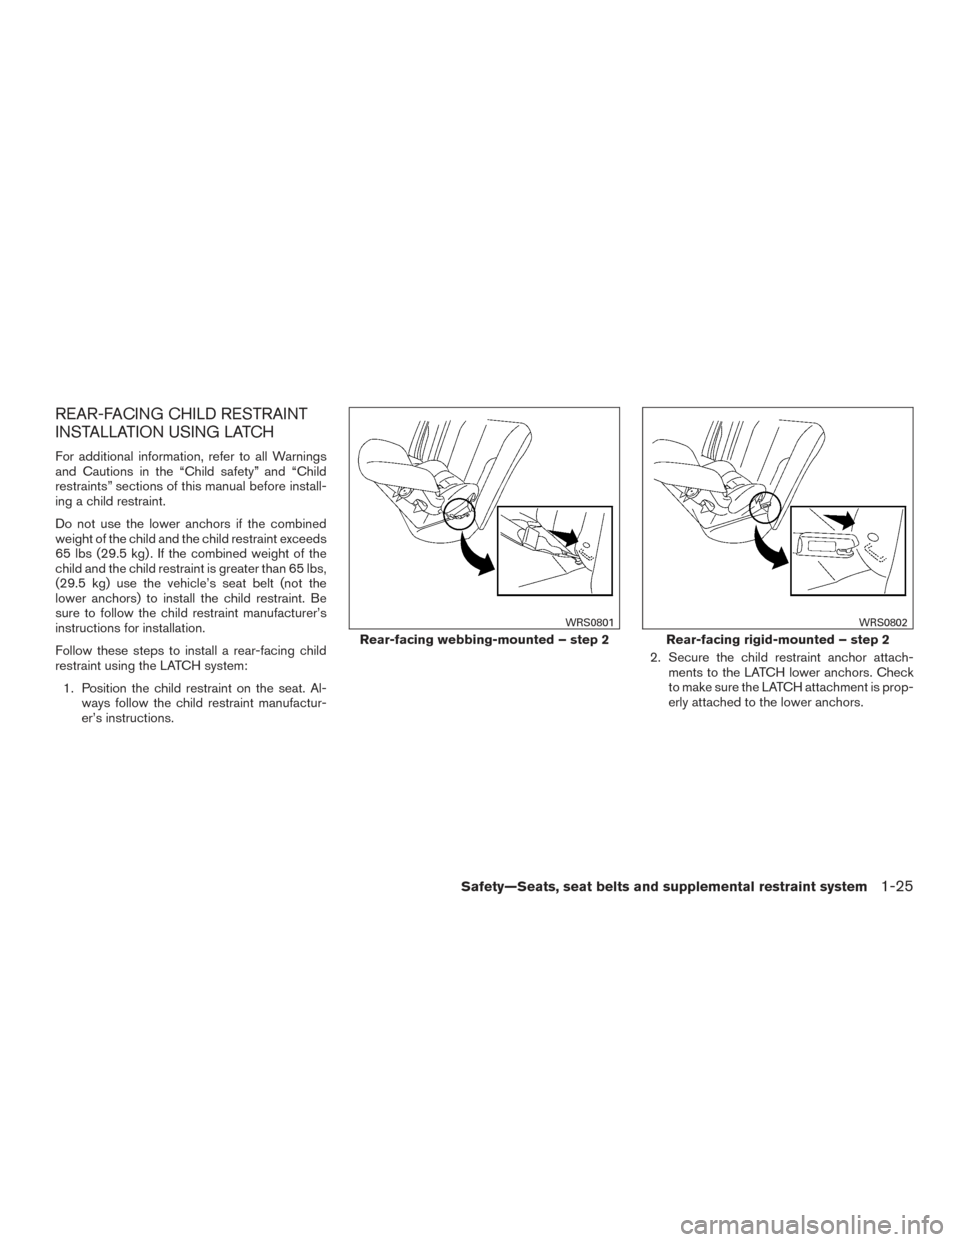 NISSAN ALTIMA 2015 L33 / 5.G Service Manual REAR-FACING CHILD RESTRAINT
INSTALLATION USING LATCH
For additional information, refer to all Warnings
and Cautions in the “Child safety” and “Child
restraints” sections of this manual before 